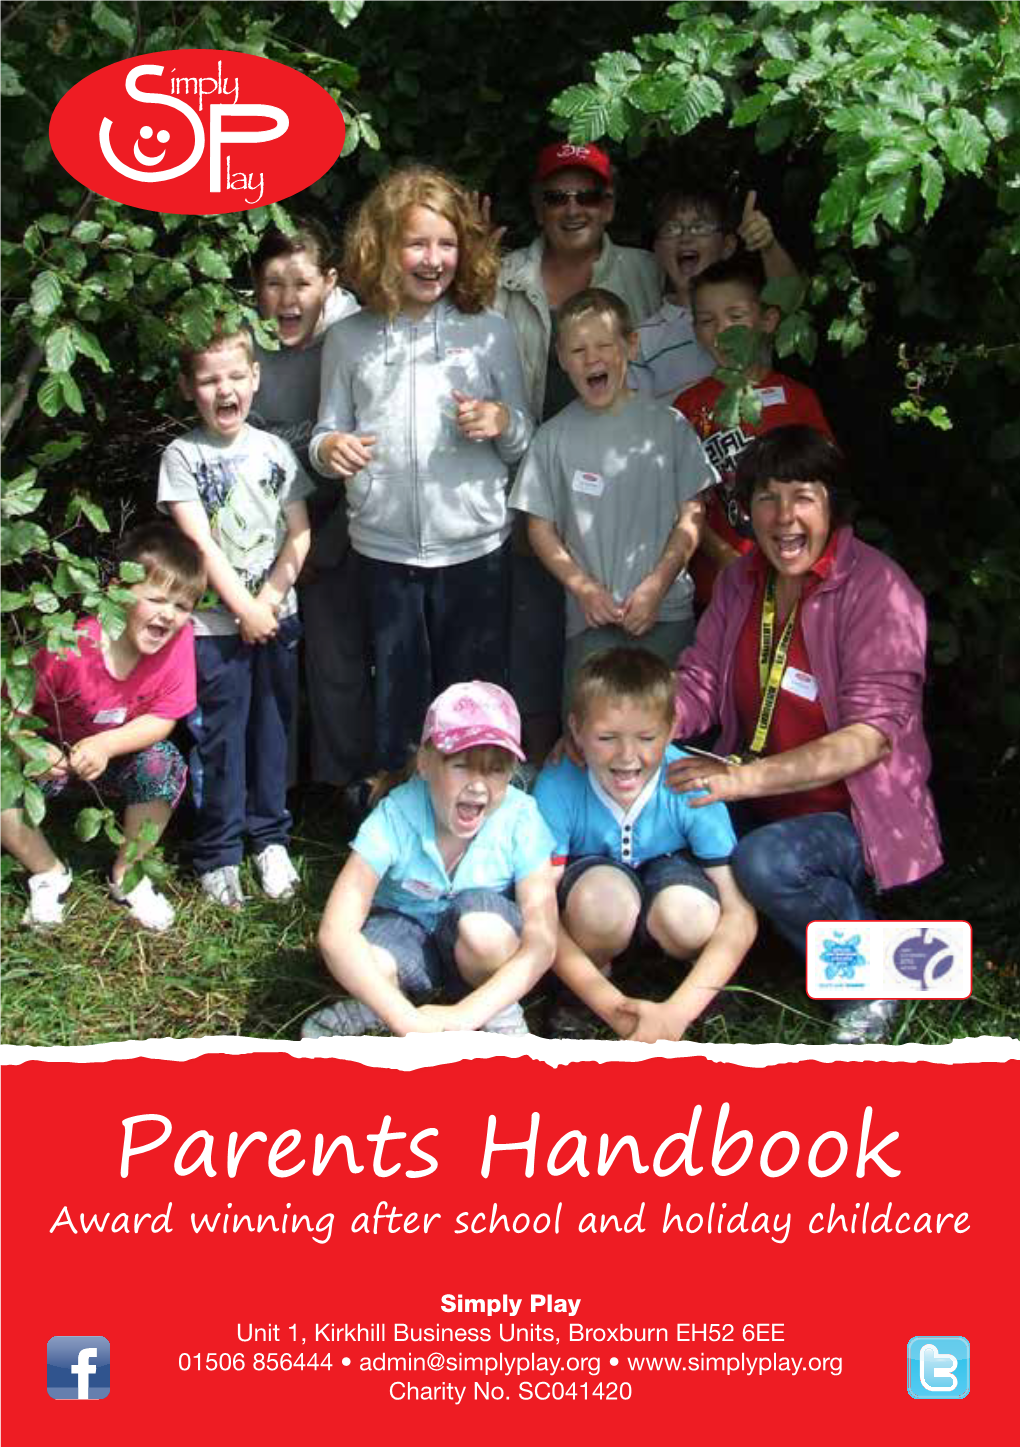 Parents Handbook Award Winning After School and Holiday Childcare